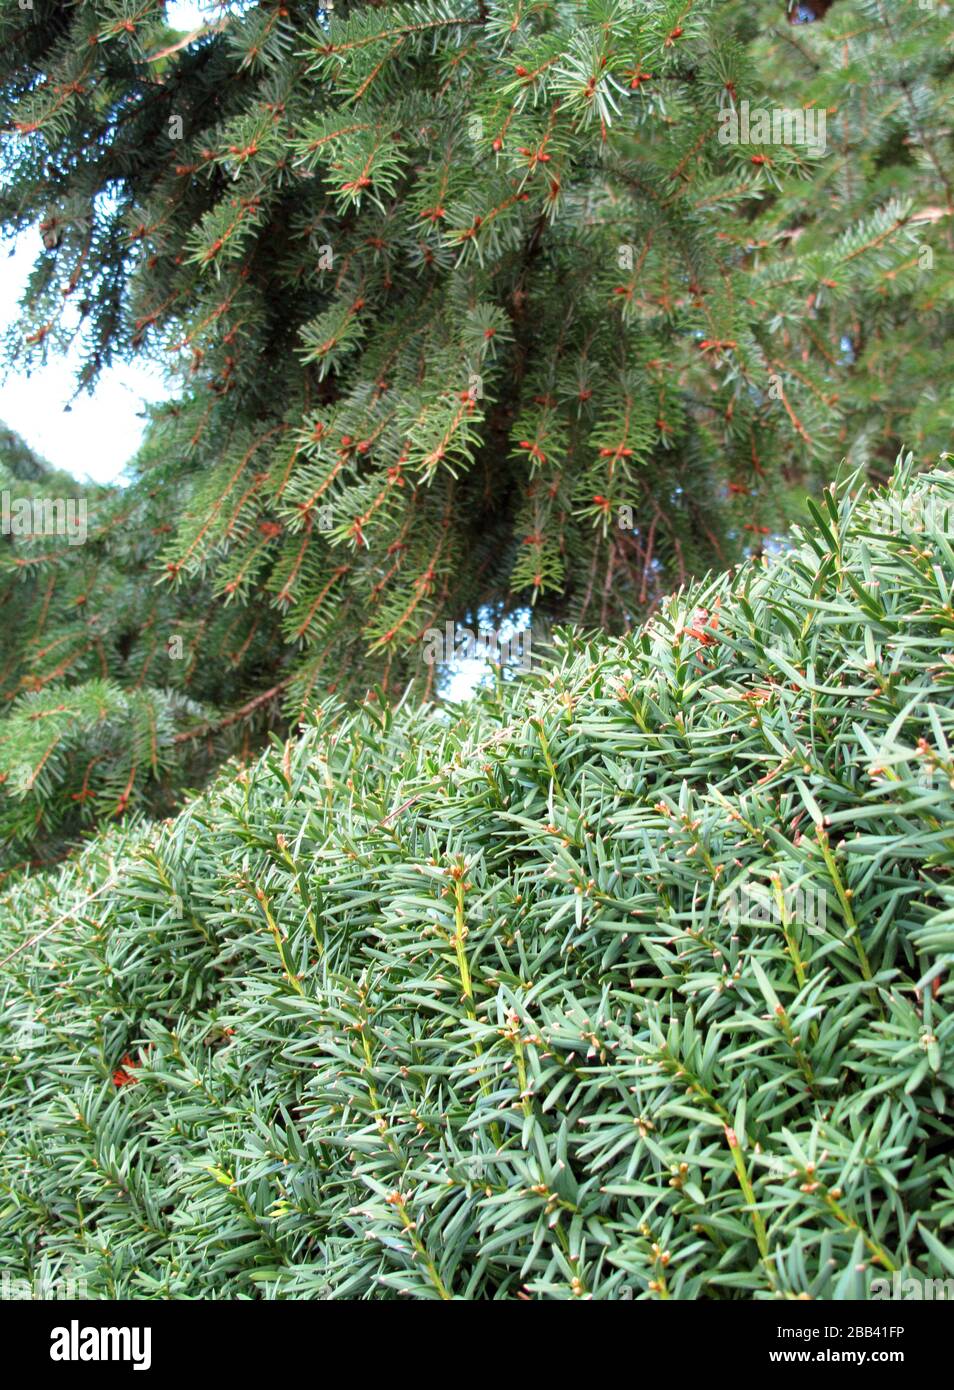 Pine tree and natural garden fence Stock Photo